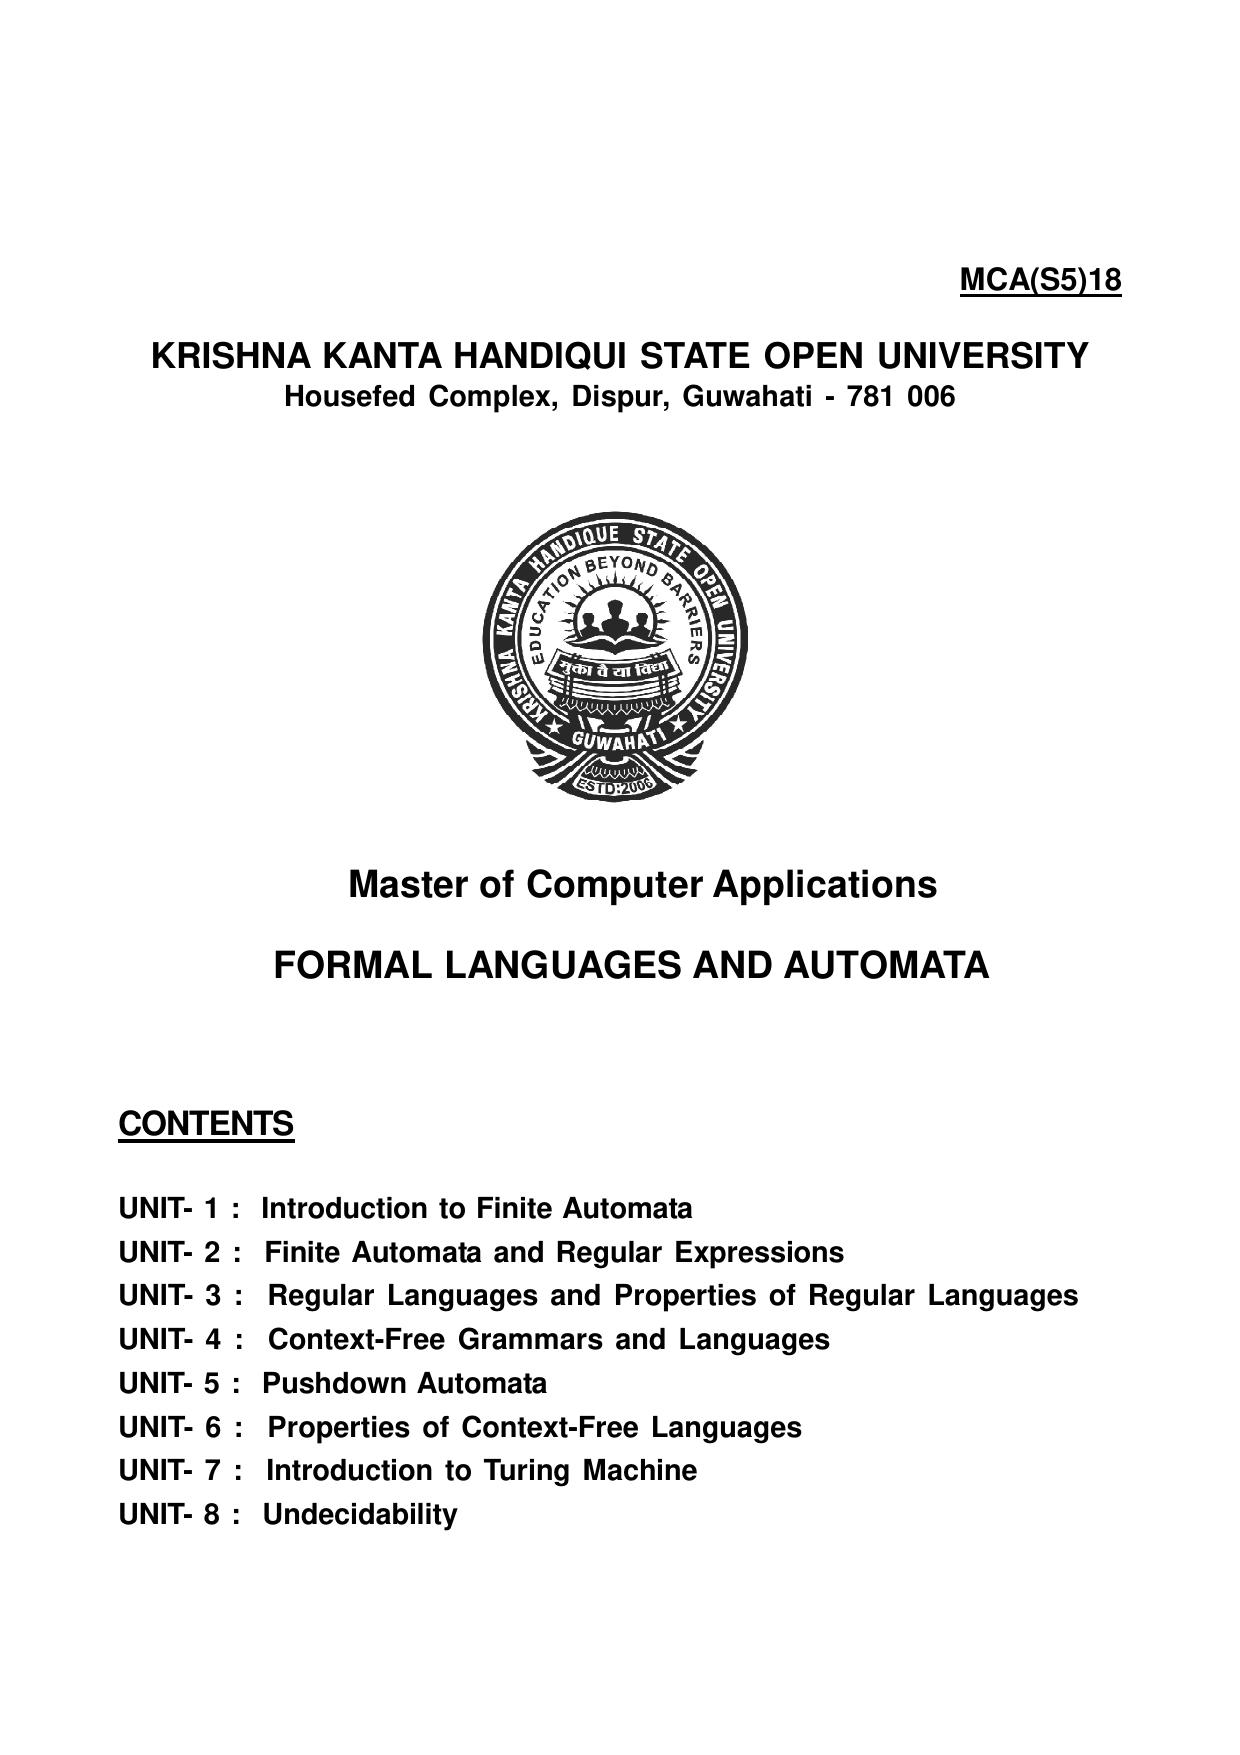 Master of Computer Applications FORMAL LANGUAGES AND AUTOMATA   2015